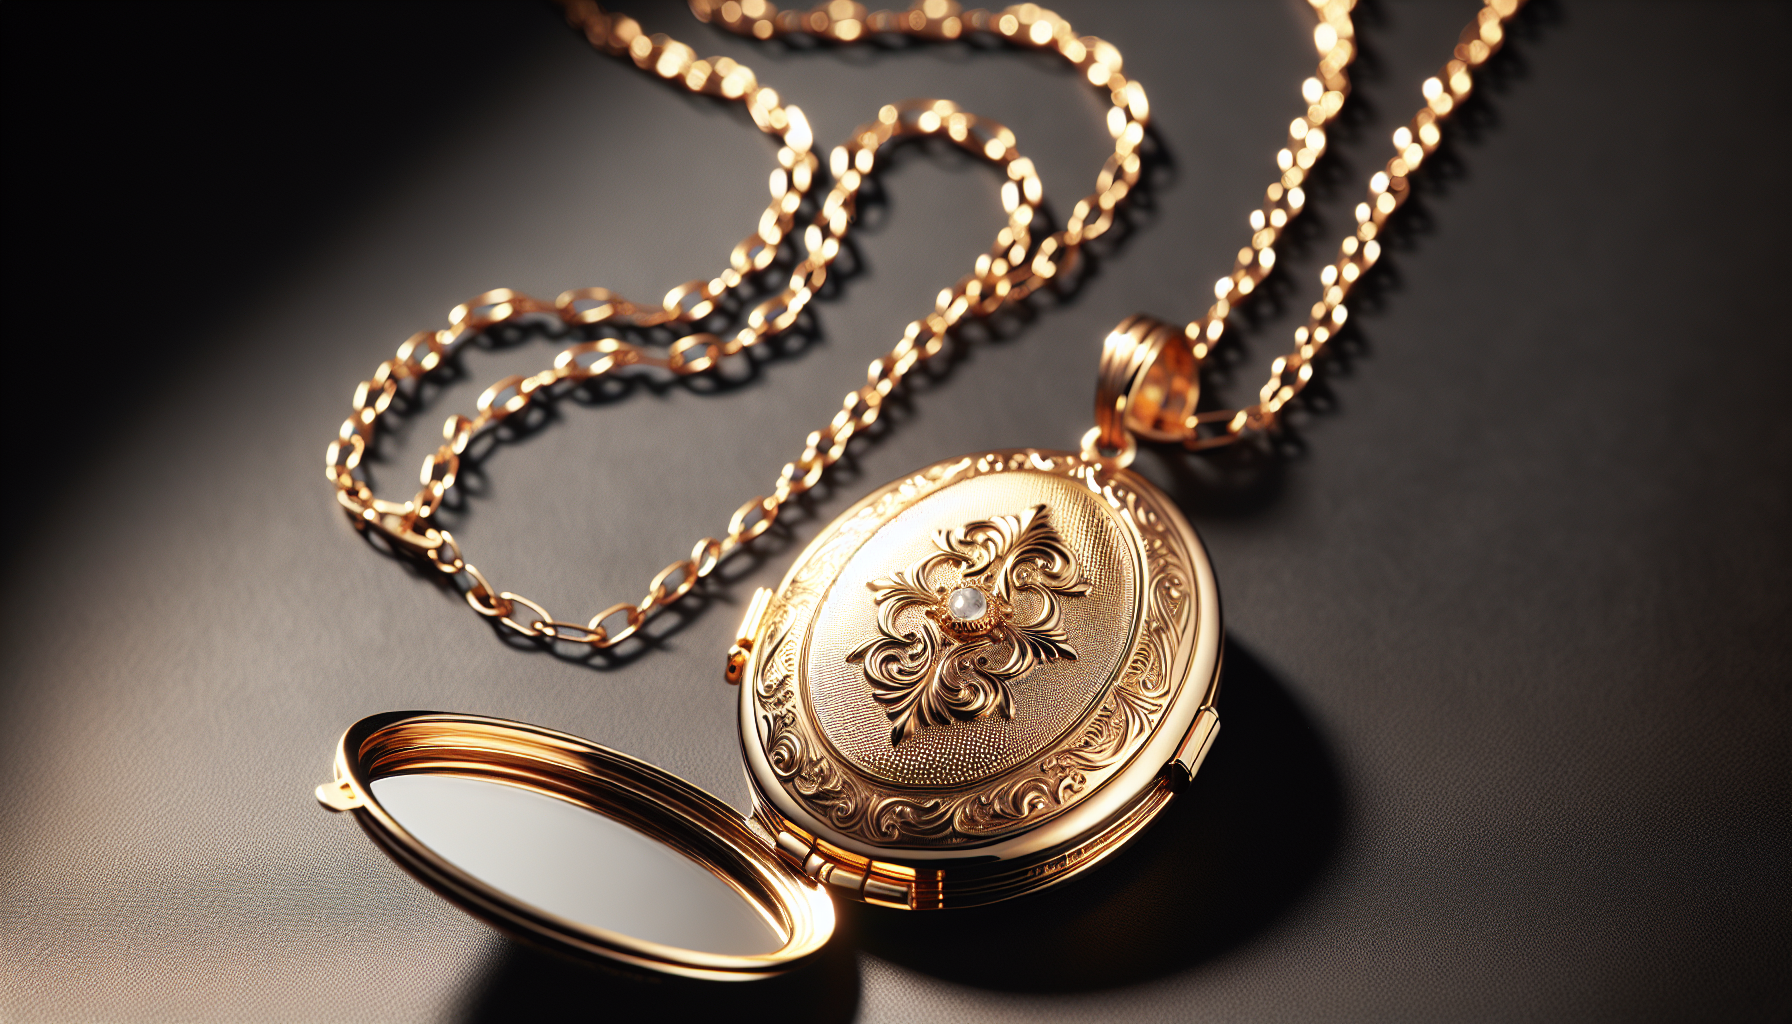 A beautifully crafted locket hanging on a fine chain. It carries an aura of timeless elegance. The pendant itself is a classic oval shape, with intricate engravings adorning its gold exterior. It open